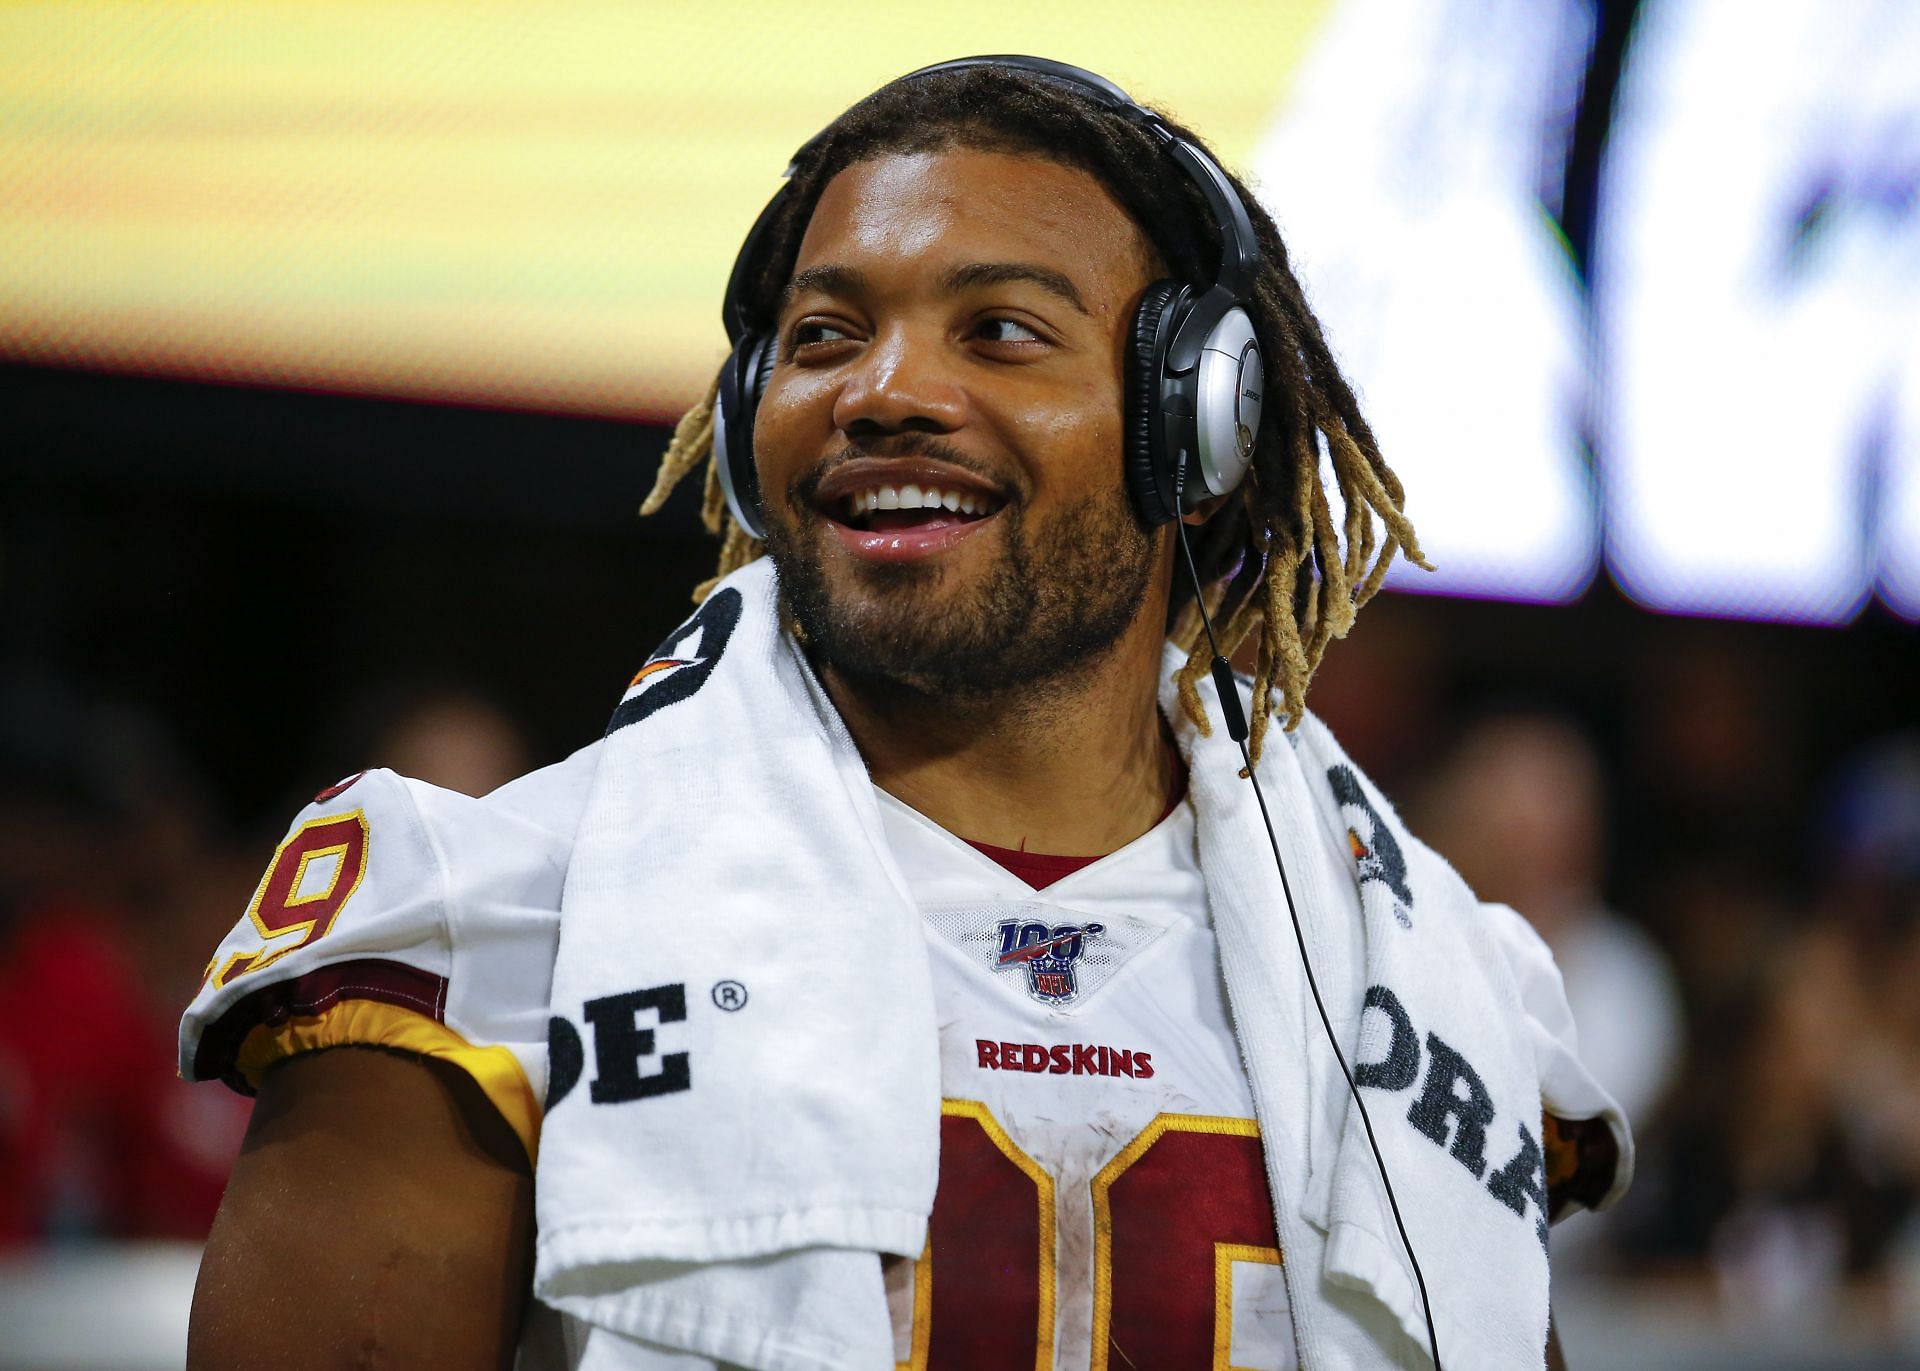 Derrius Guice slipped in the NFL Draft after rumors about his combine interviews started